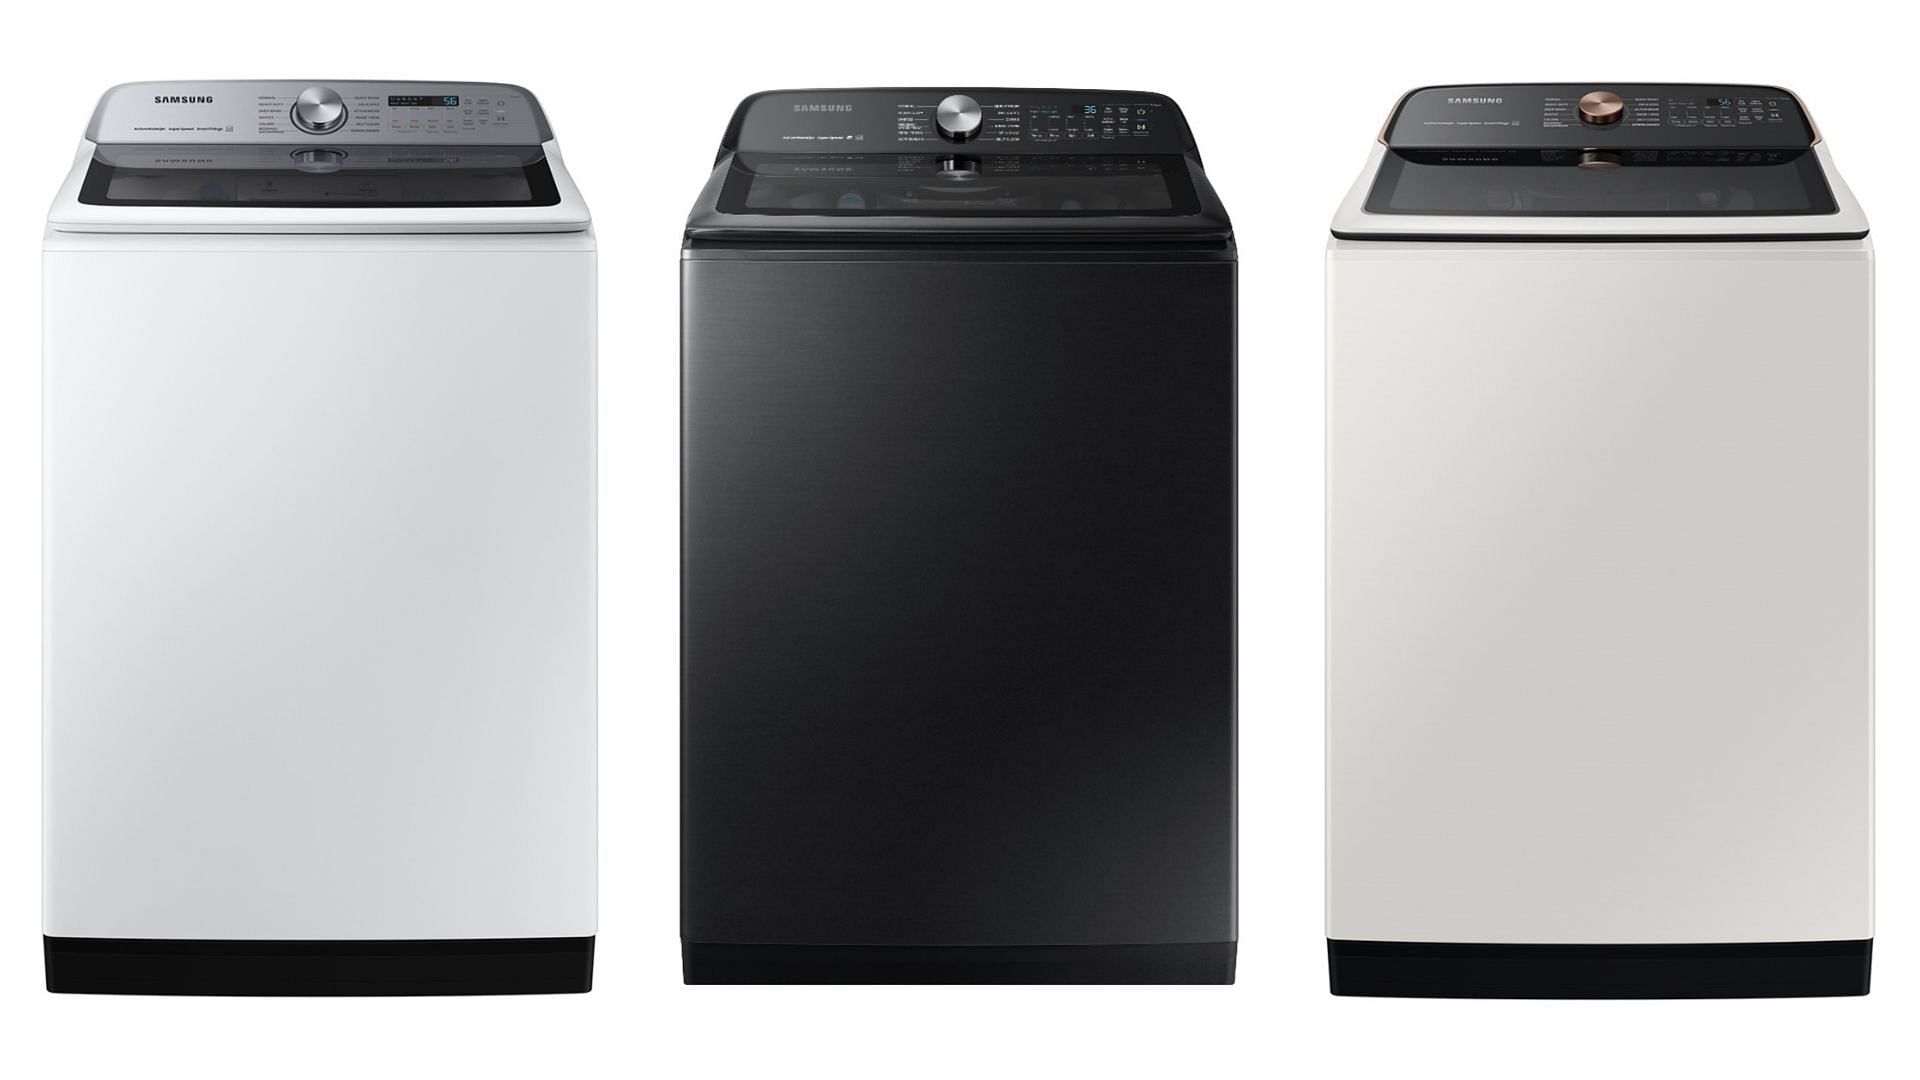 colors of the machines under the Samsung washing machine recall (Image via CPSC)